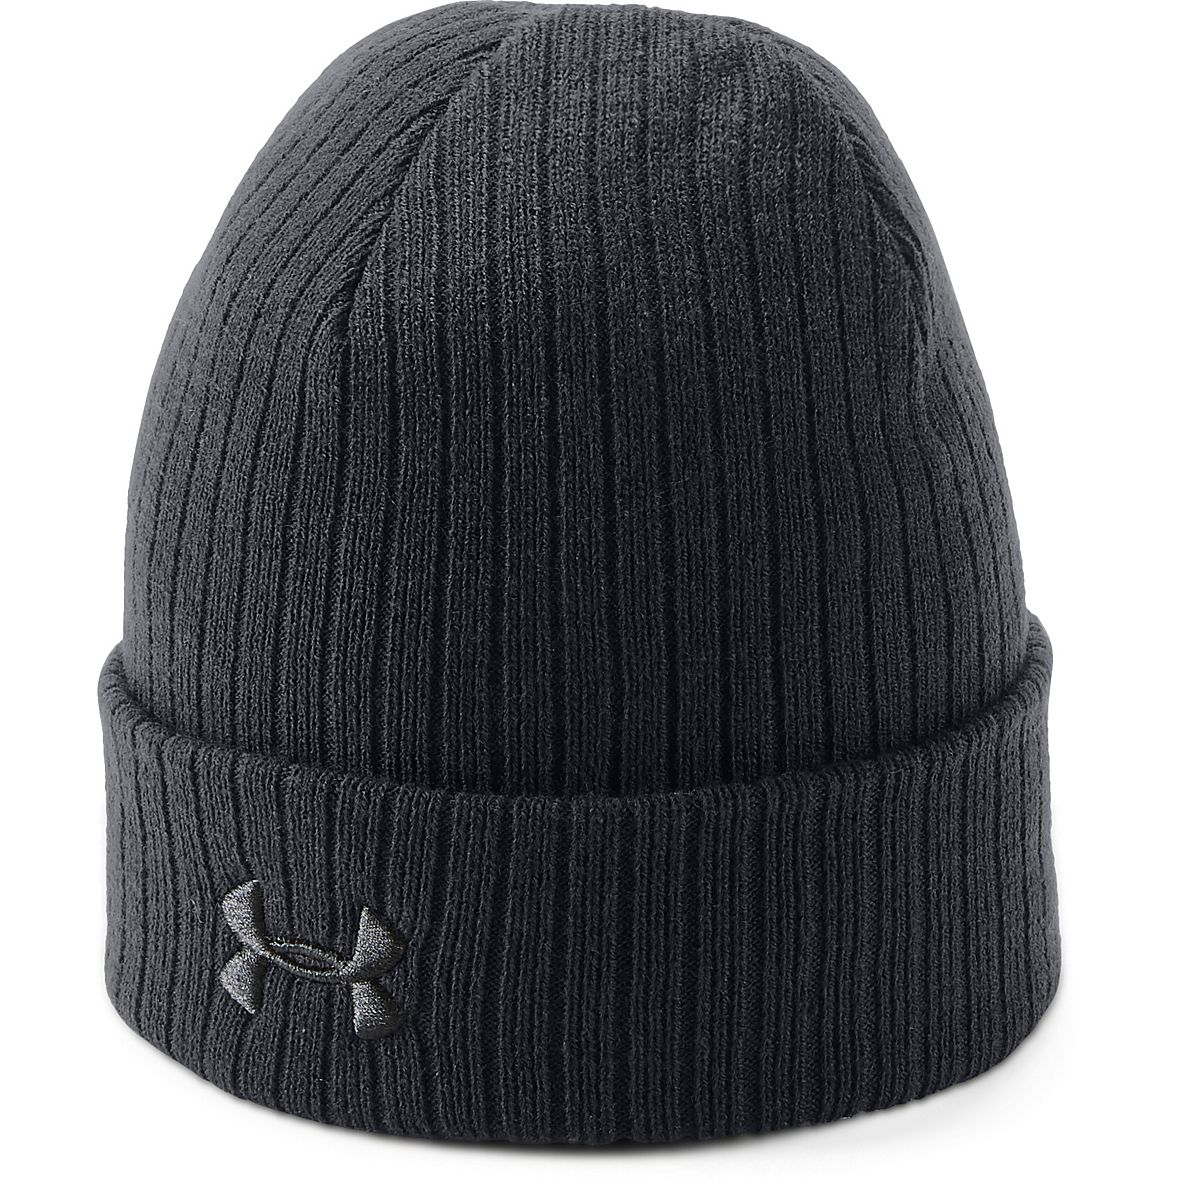 Under Armour Men's Tactical Stealth 2.0 Beanie